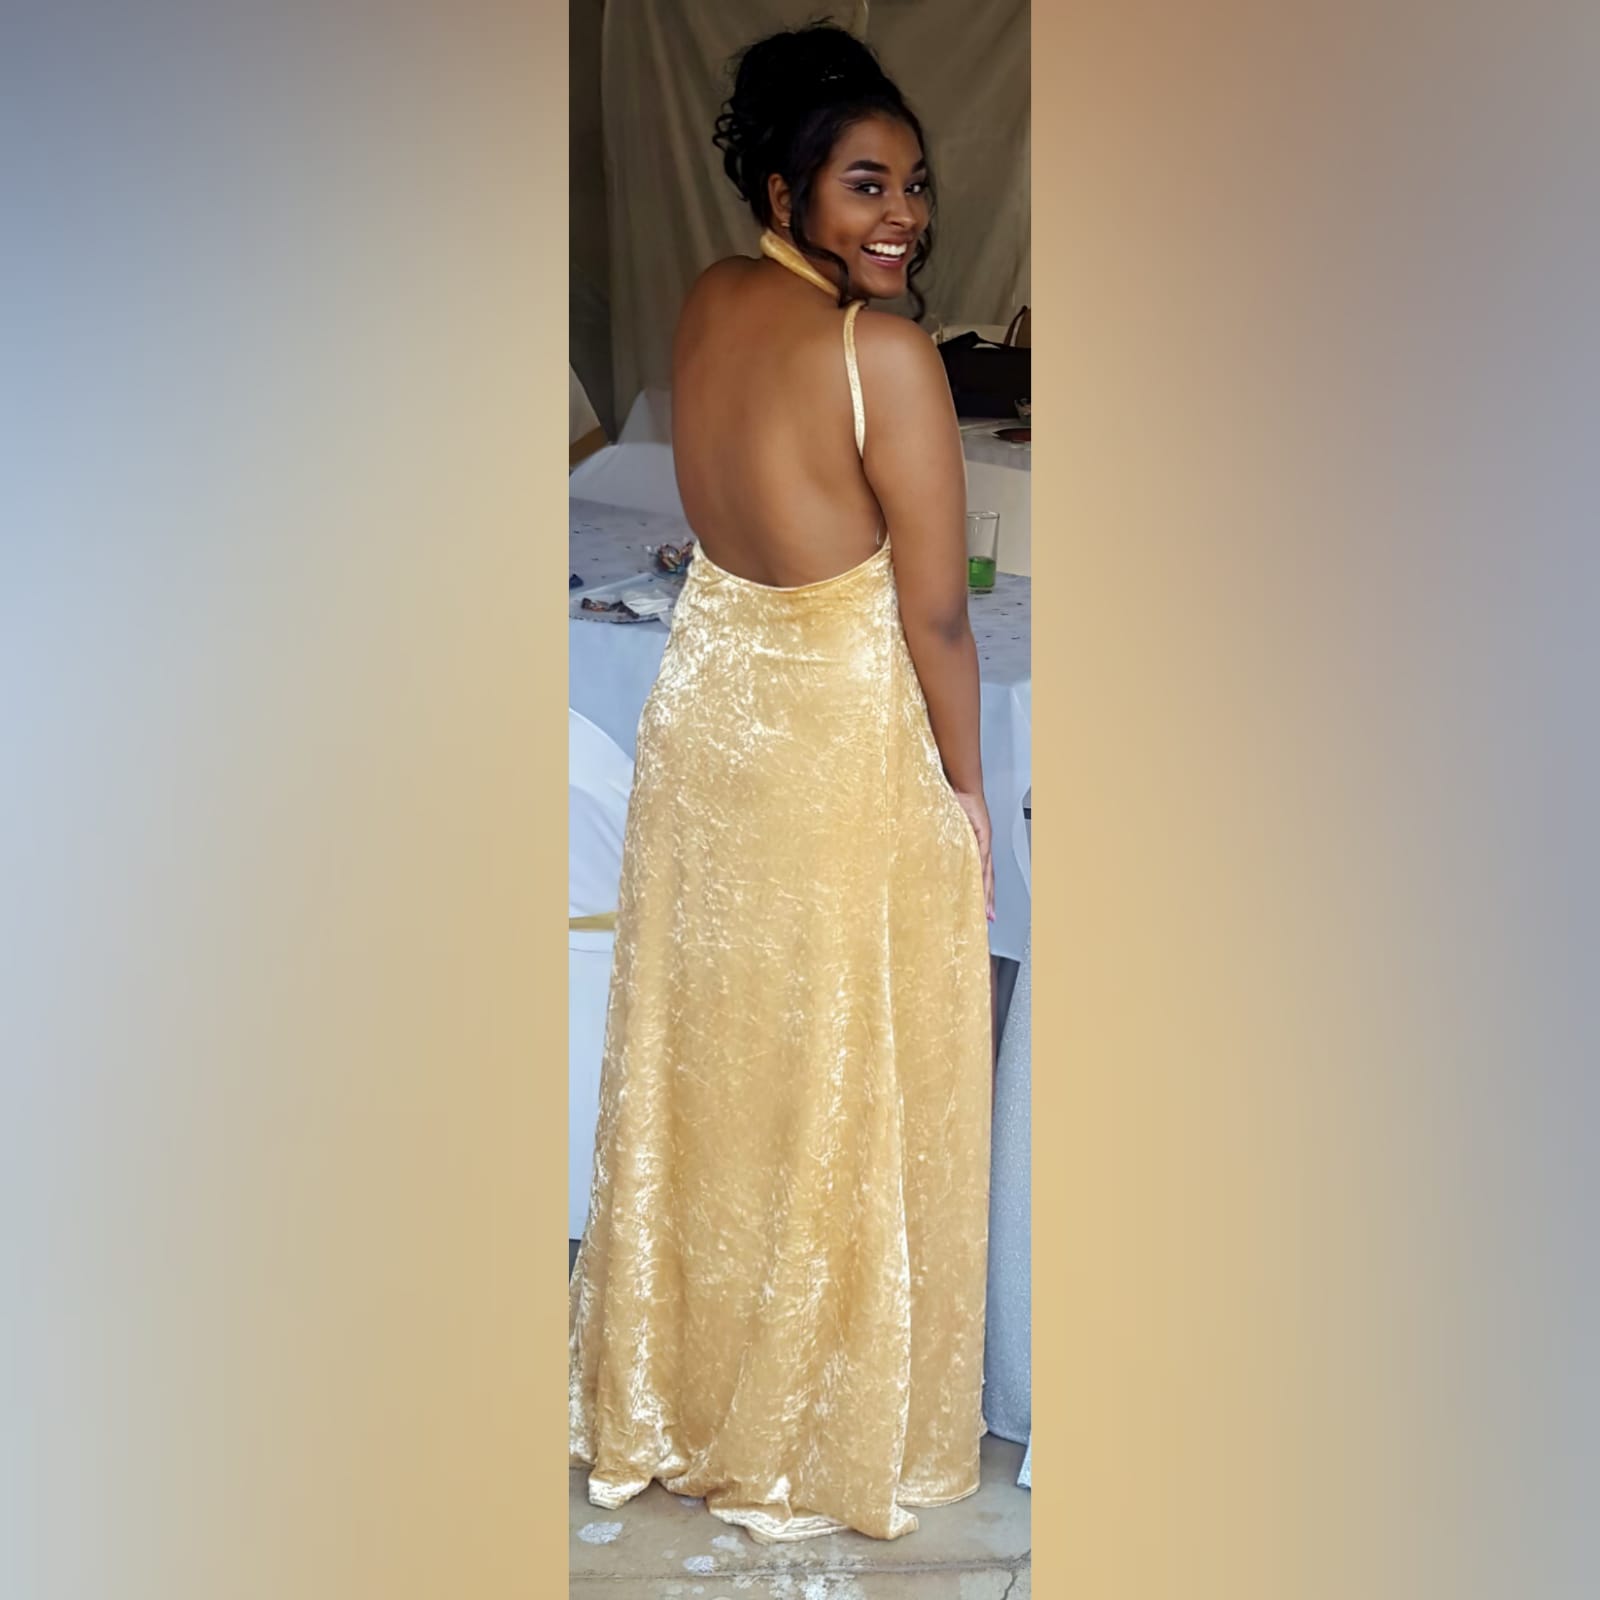 Champagne velvet long prom dress 5 champagne velvet long prom dress with a v neckline, rounded backless design with a high slit and a matching choker.